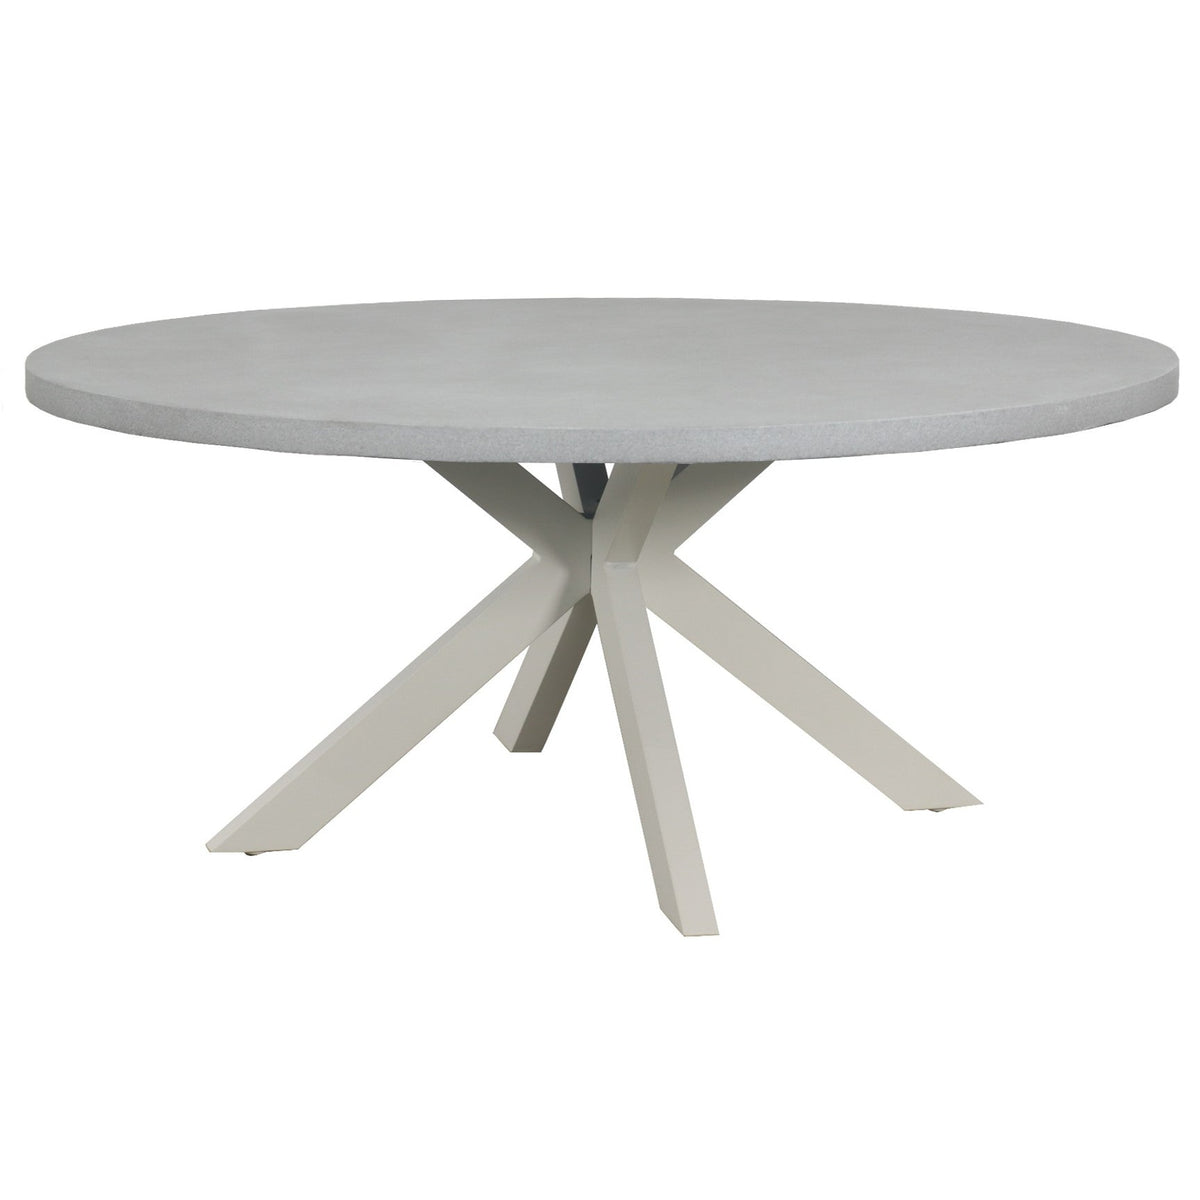 Round Cement Dining Table 1700mm